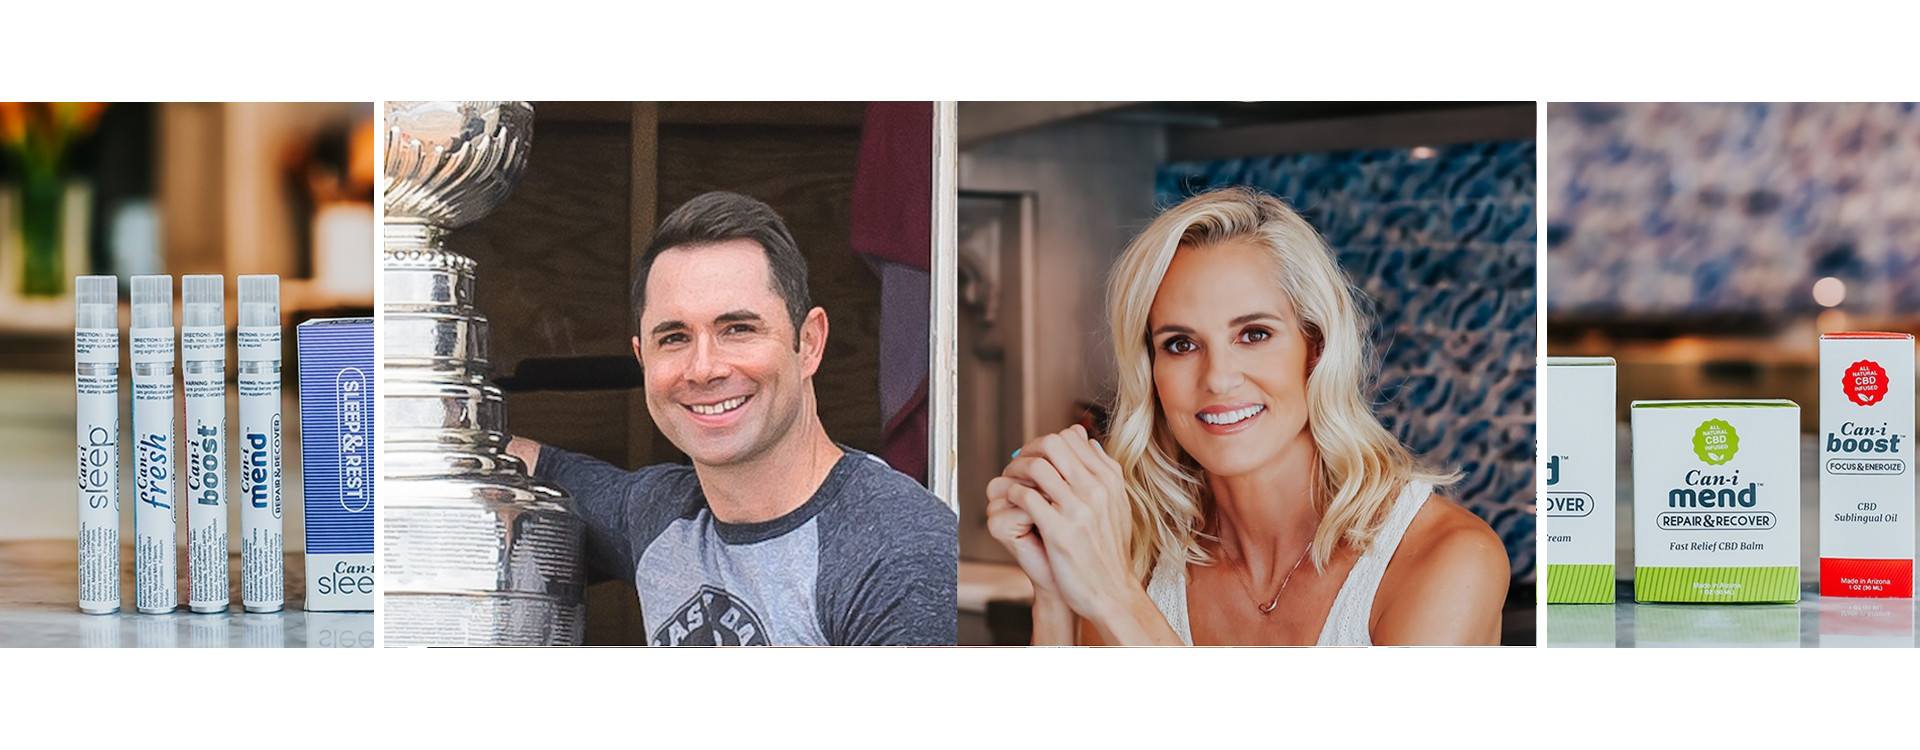 A Conversation About CBD & Wellness with Dara Torres & Andy O’Brien Sunday, Sept 29th